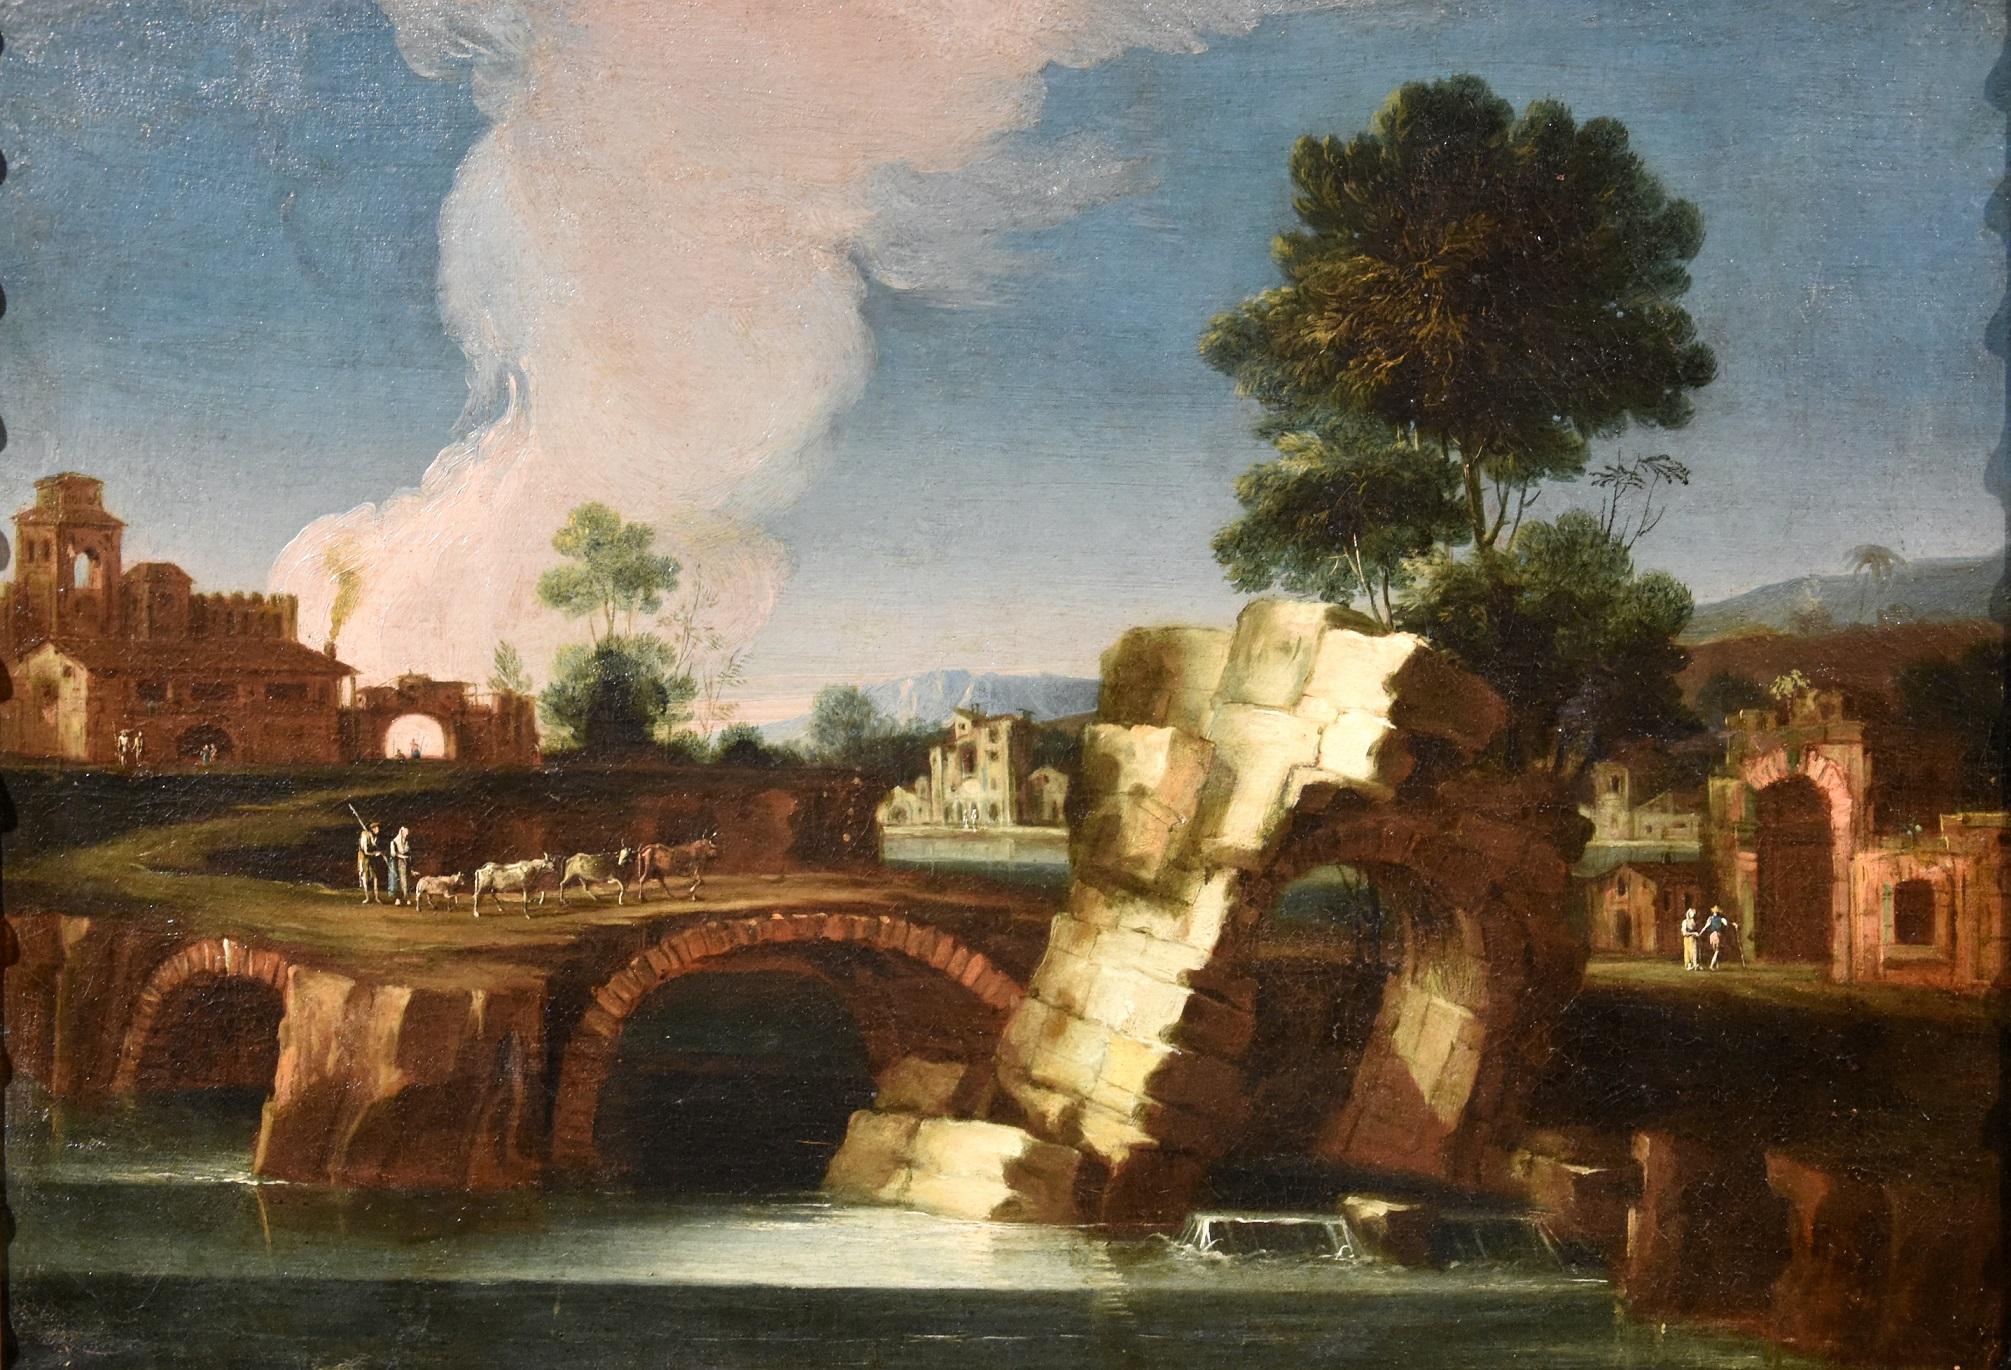 Paolo Anesi (Rome 1697 - 1773) Landscape Painting - Landscape Paint Oil on canvas 18th Century Old master Roma Italy River Water Art